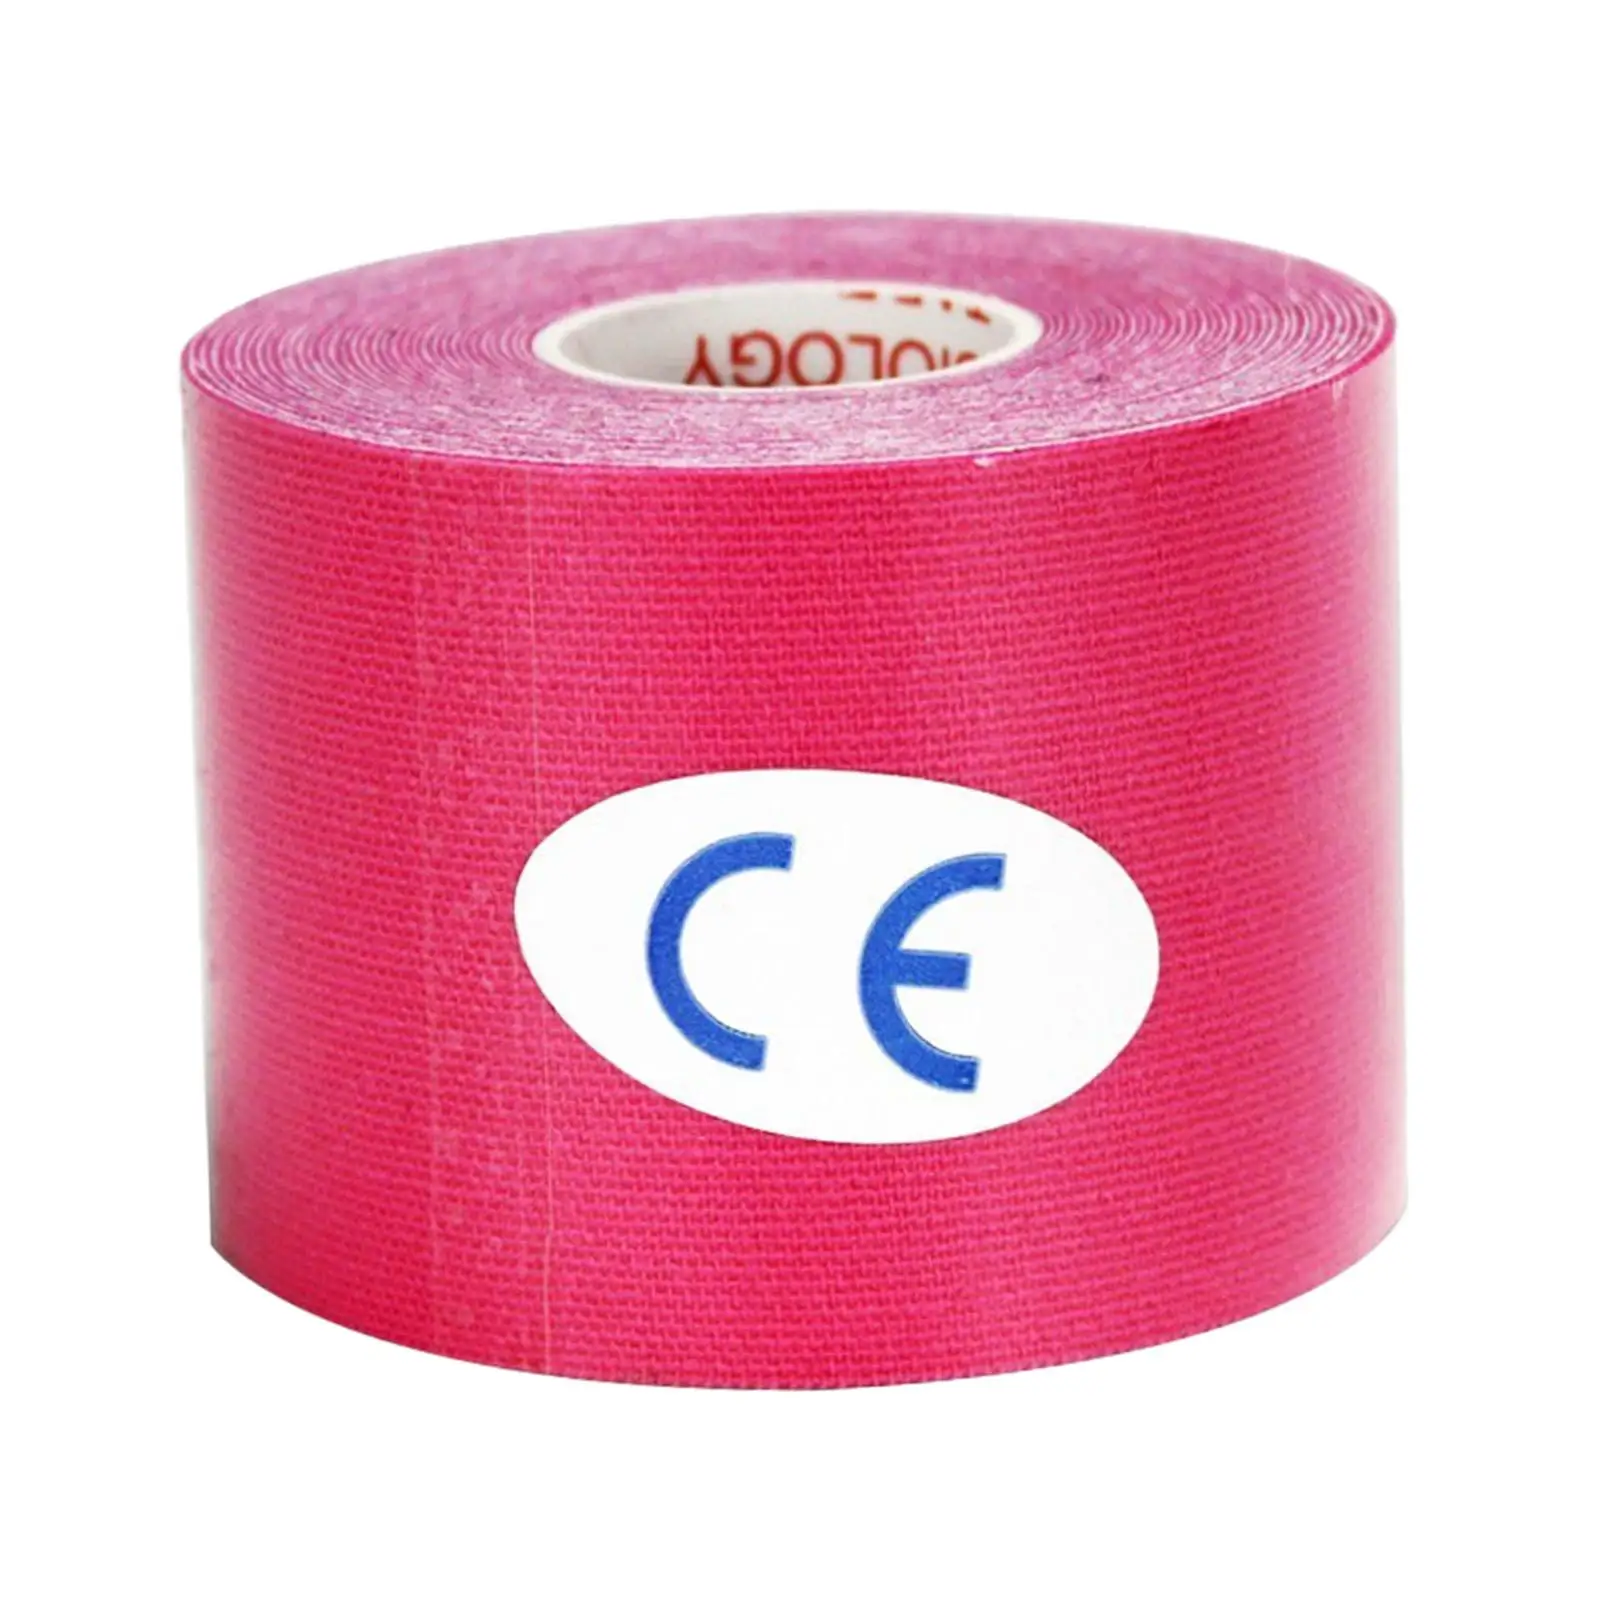 Athletic Tape Muscle Tape Muscle Support 5cmx5M Sports Wrap Tape Protective Tape for Body Wrists Shoulder Ankles Football